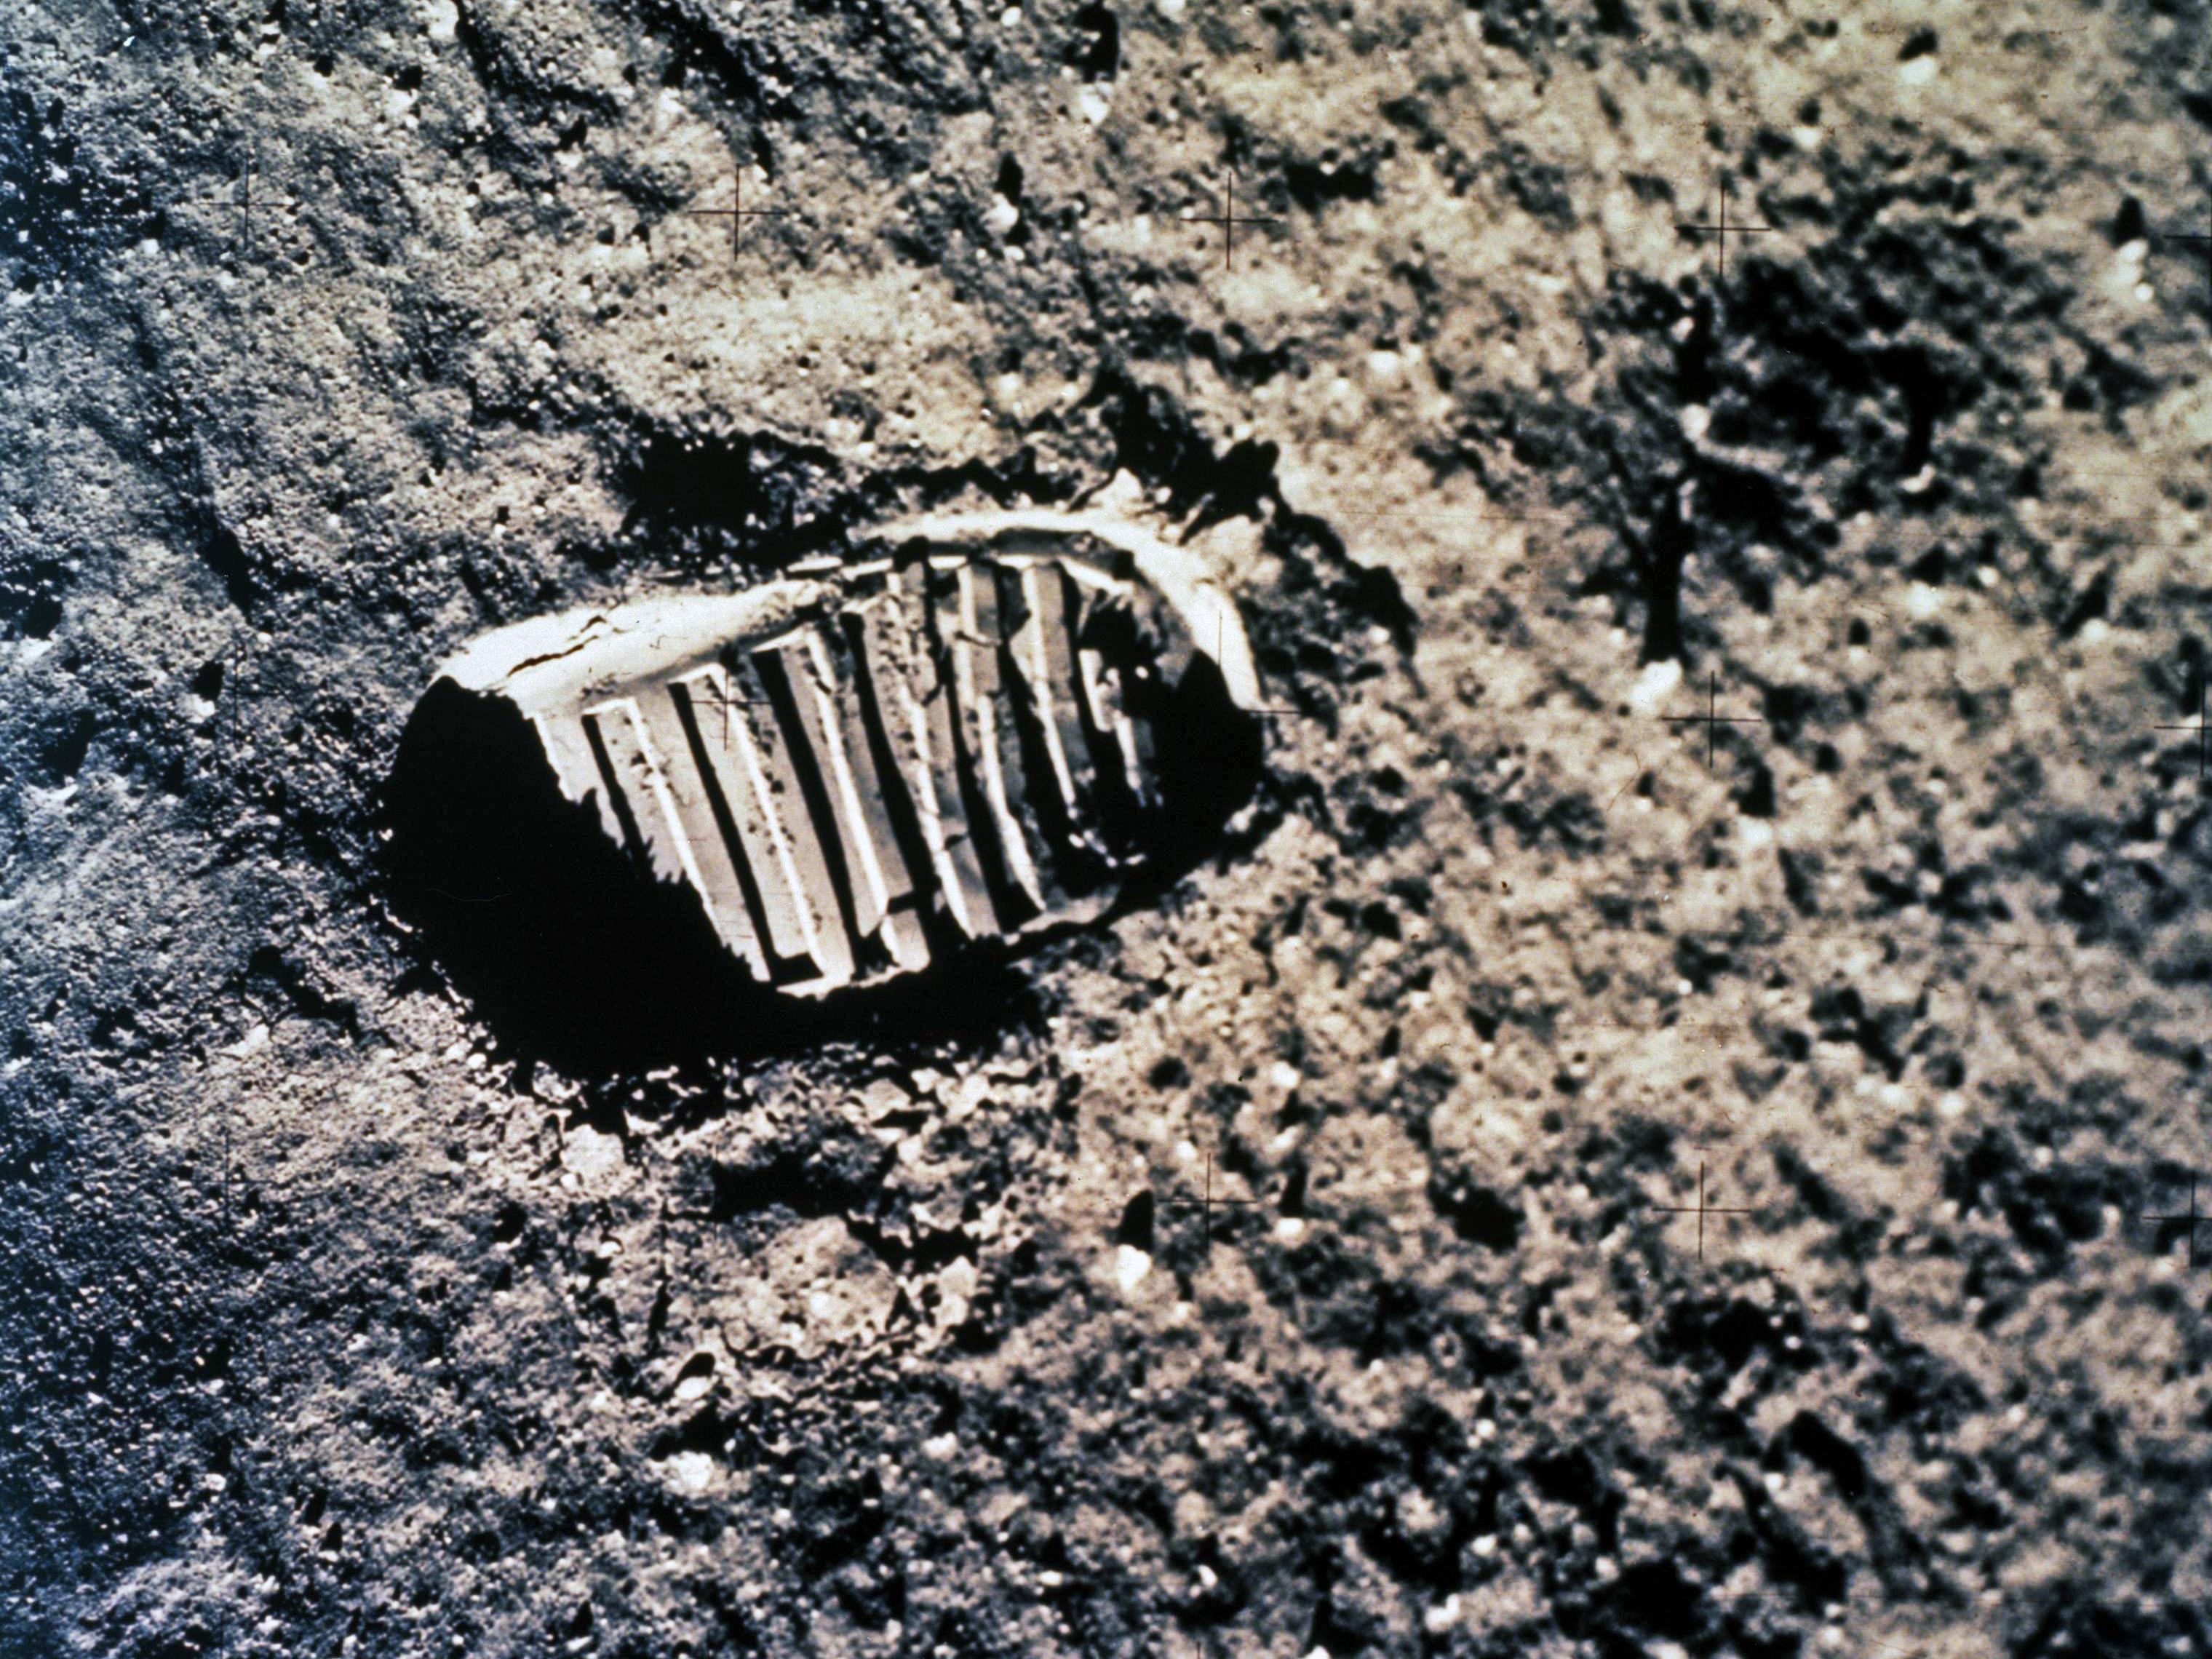 46 years ago, the human race stepped onto the moon